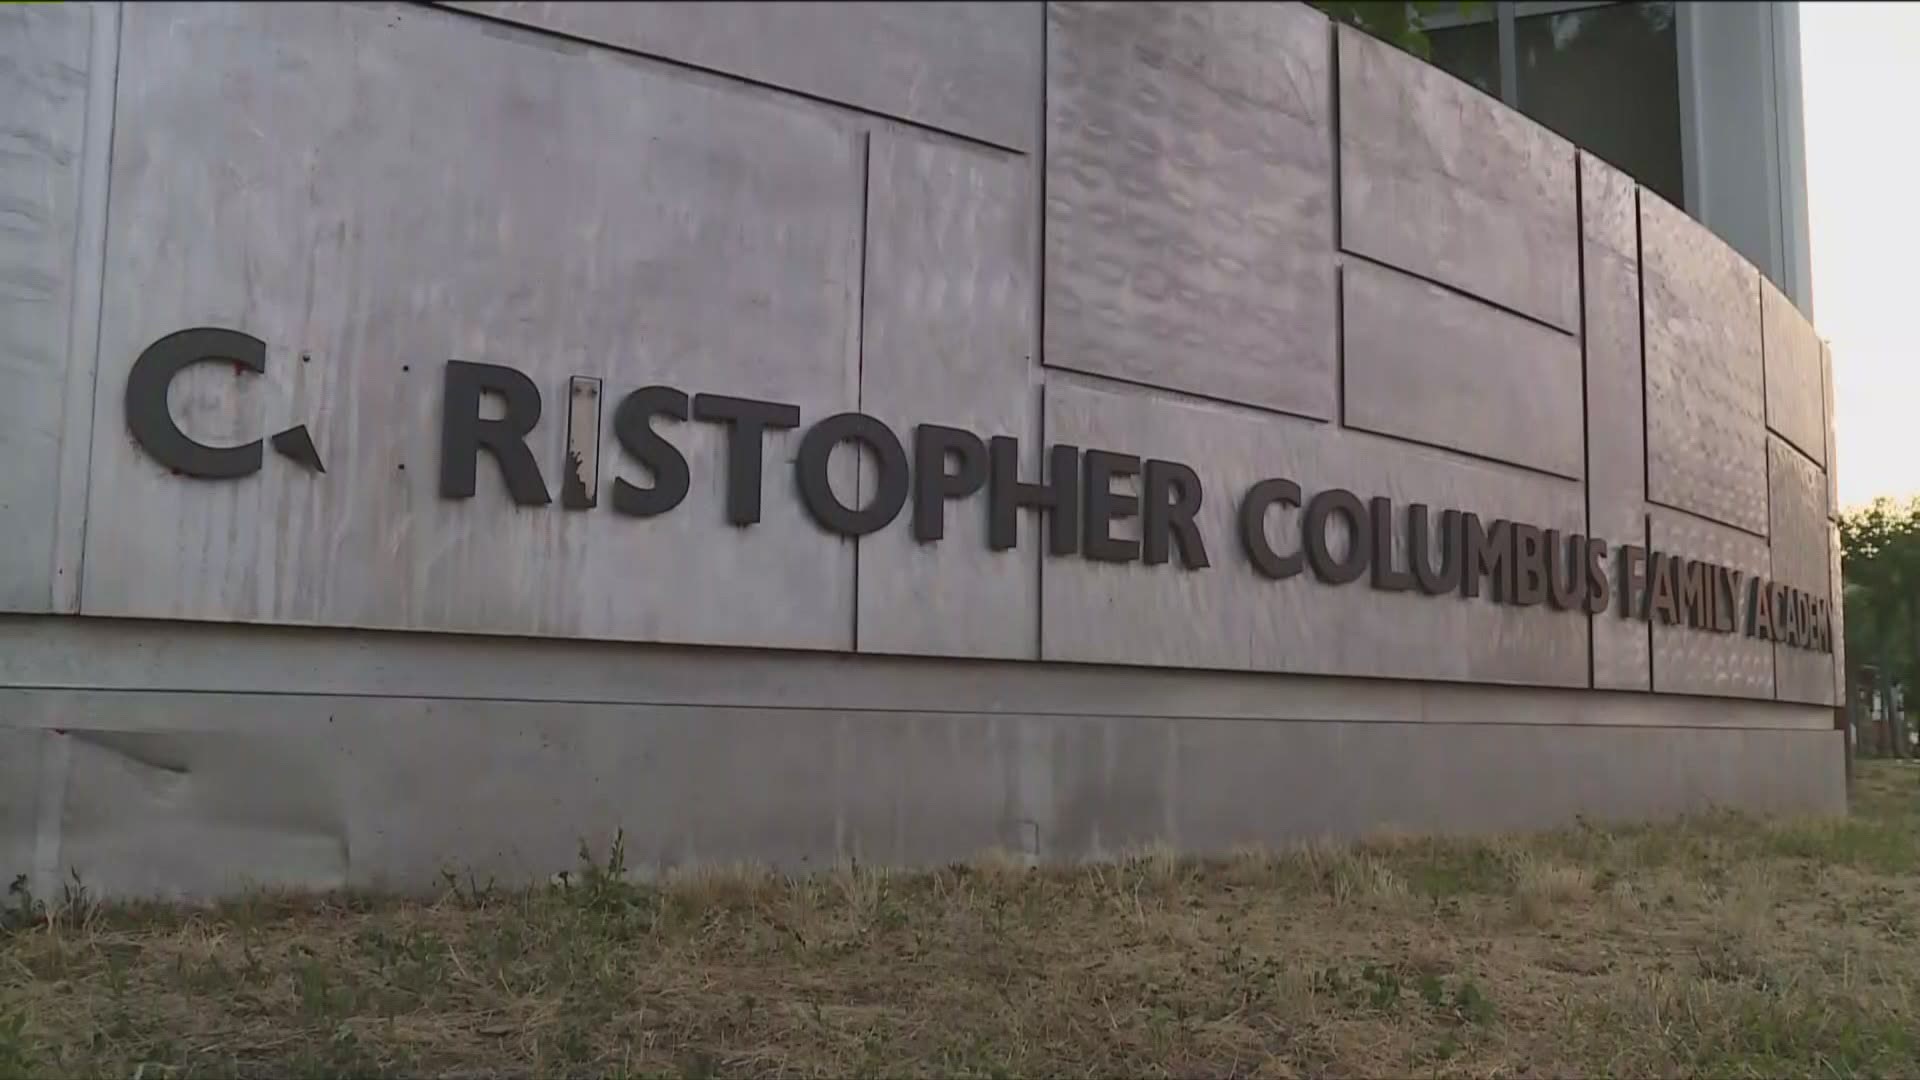 A group of demonstrators gathered out front of the former Christopher Columbus Family Academy to celebrate the decision to change the schools name.